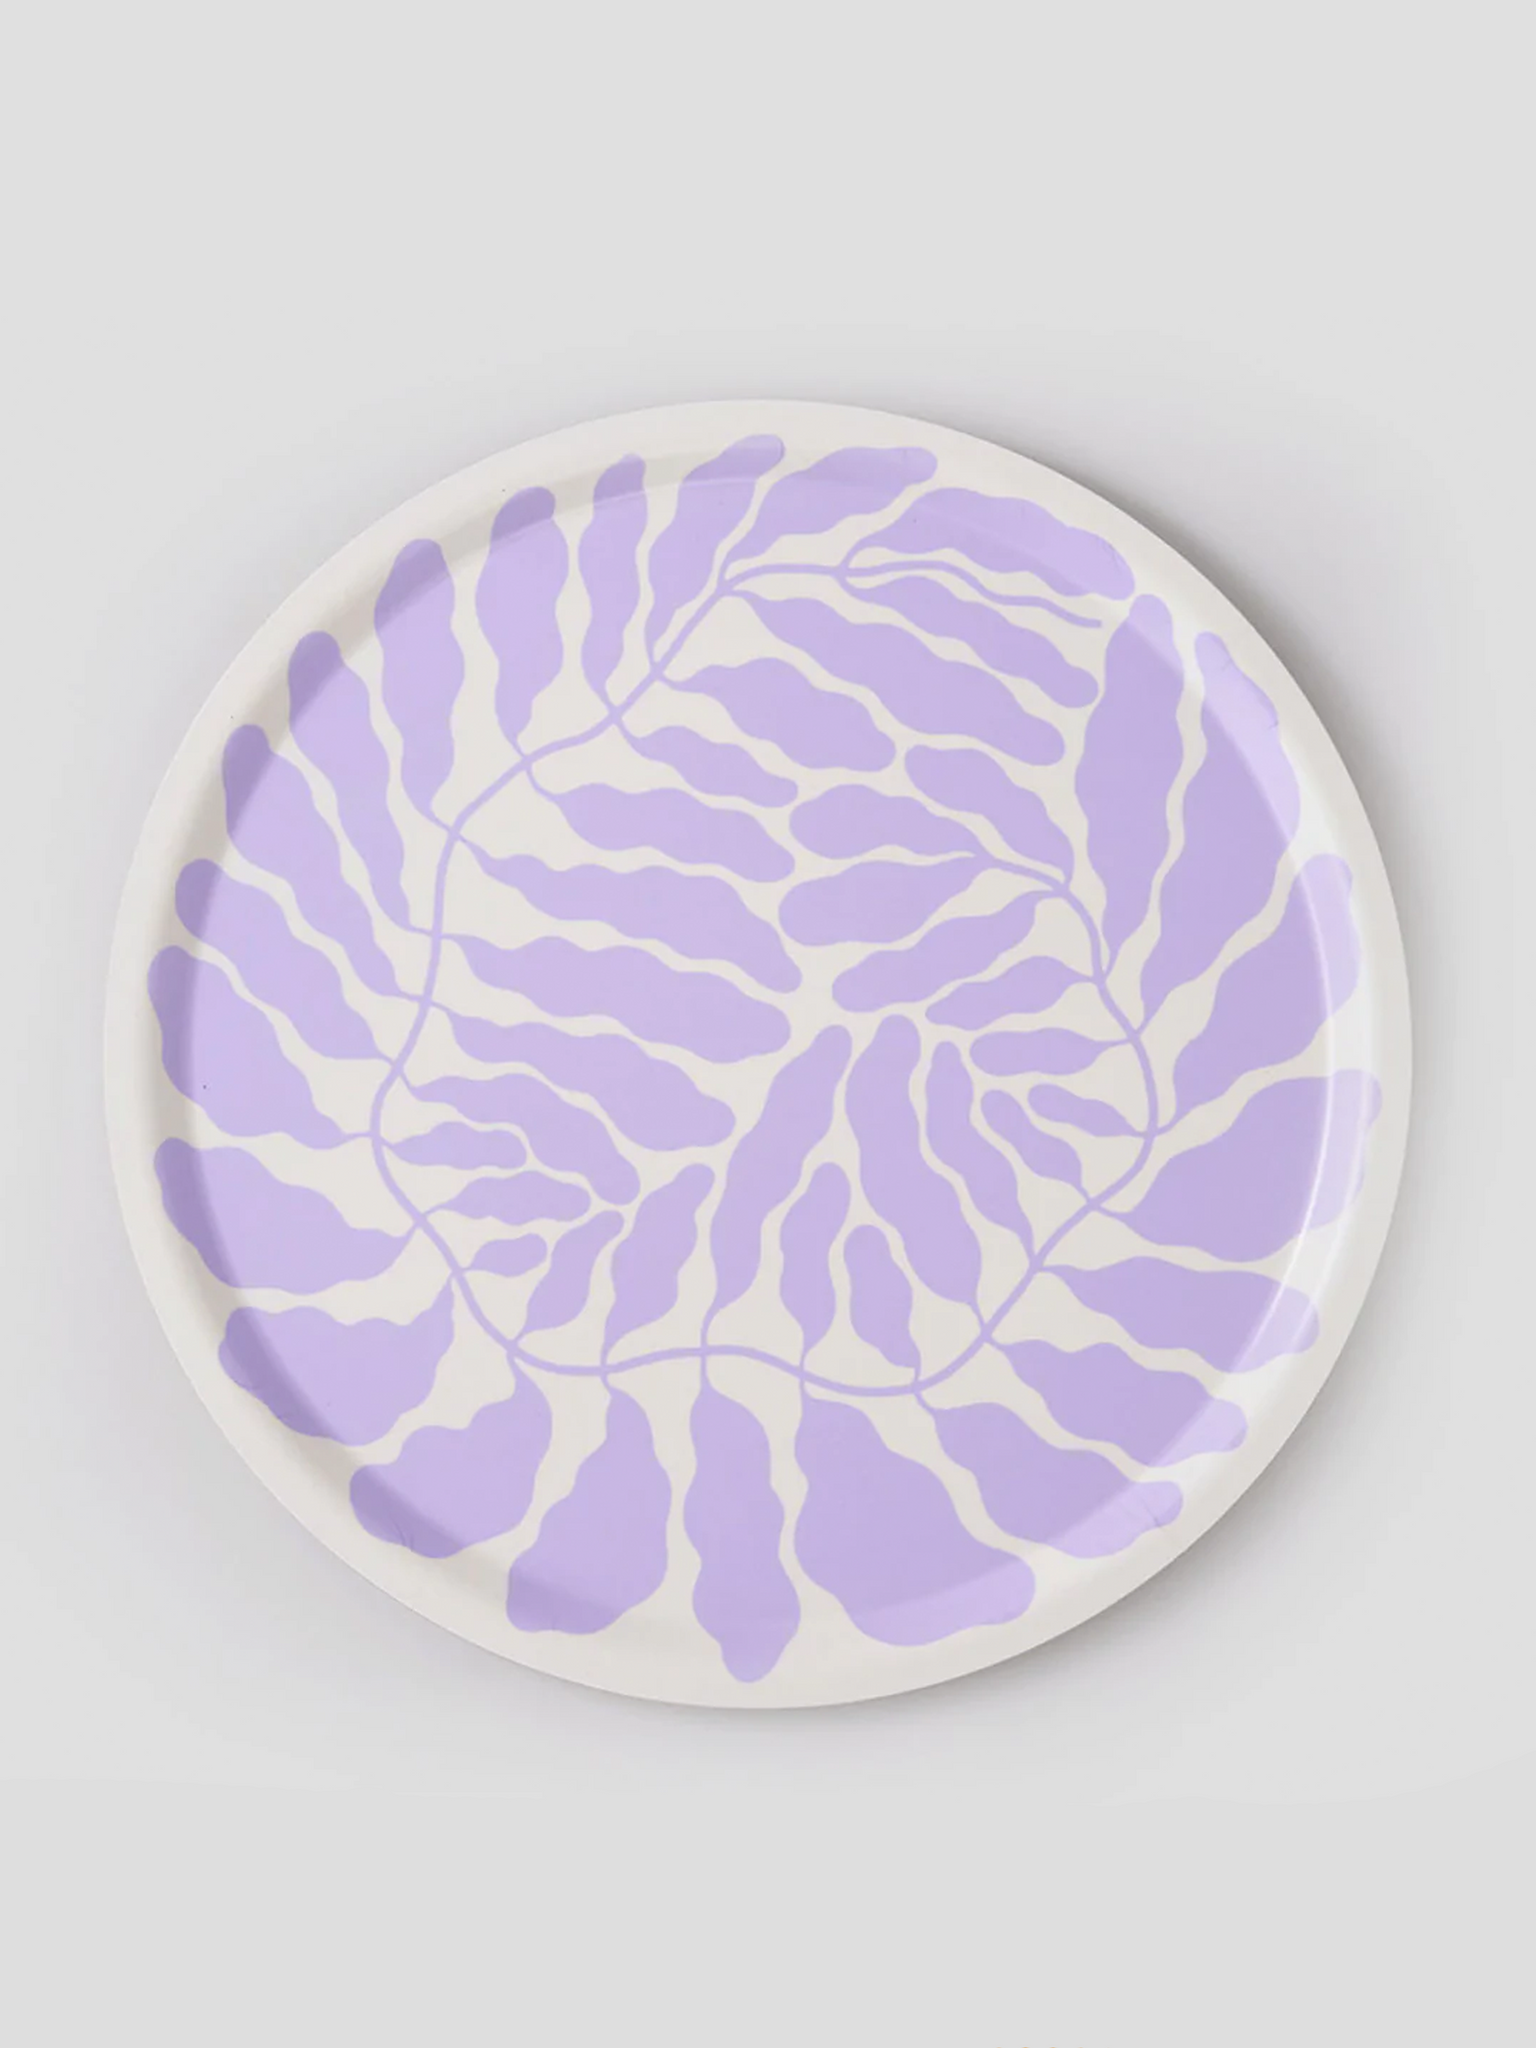 'Lilac Leaves' Tray by Linnéa Andersson